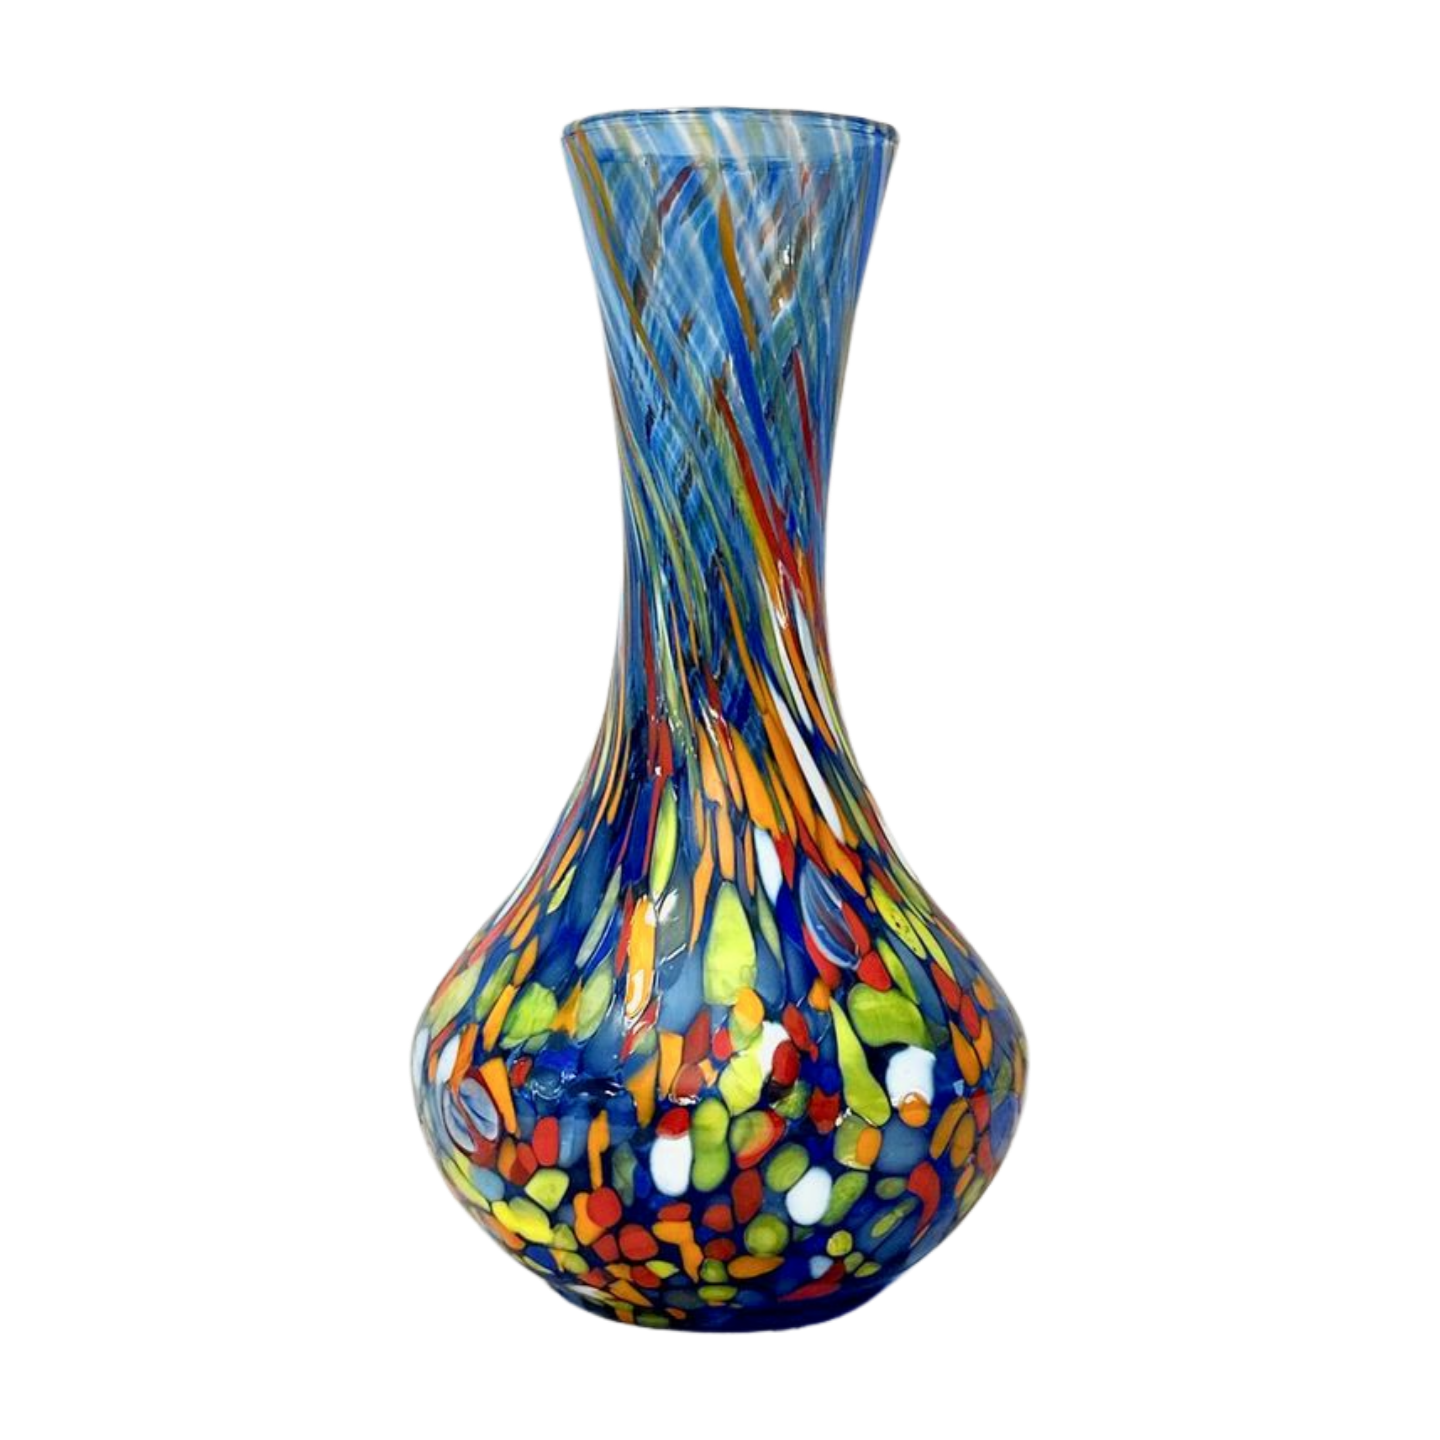 Murano glass vase in a classic blue design. Hand-blown in Italy.